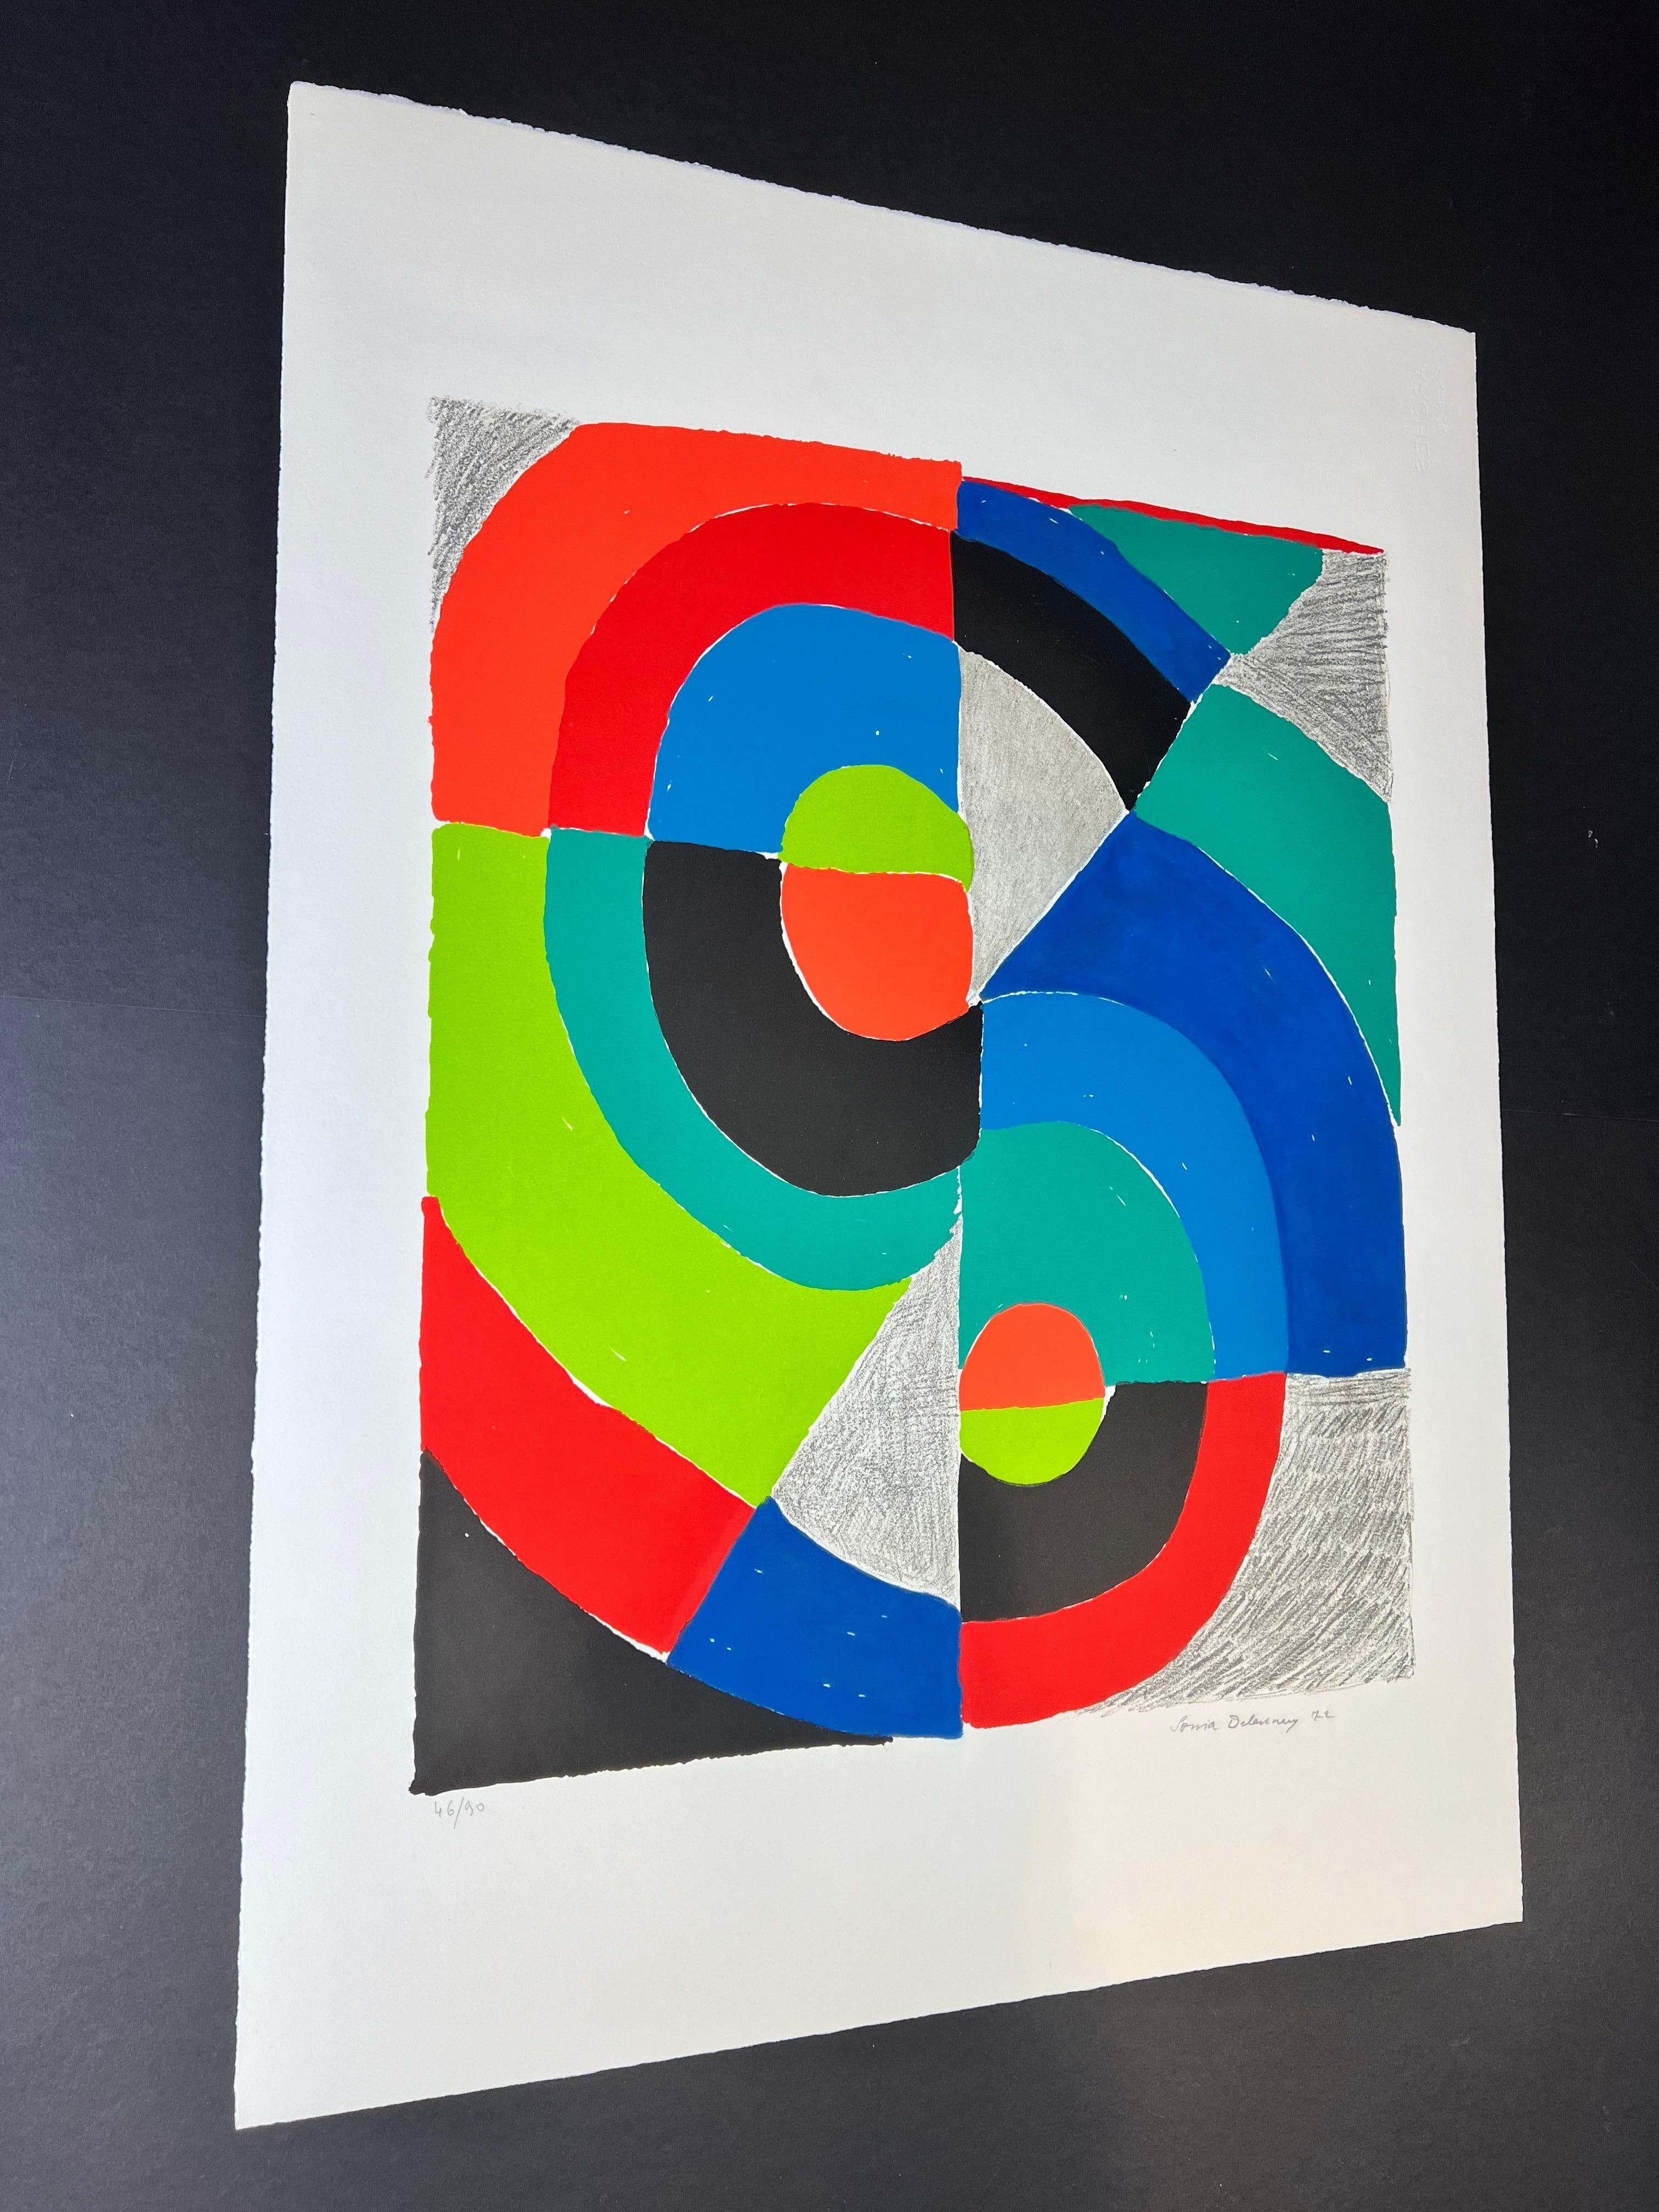 color lithograph on Arches paper , edited in 1972
Limited edition of 90 copies
Current copy numbered as: 46/90 on the lower left corner
signed and dated in pencil by artist in lower right corner
paper size: 76 x 56 cm
excellent conditions, with deep